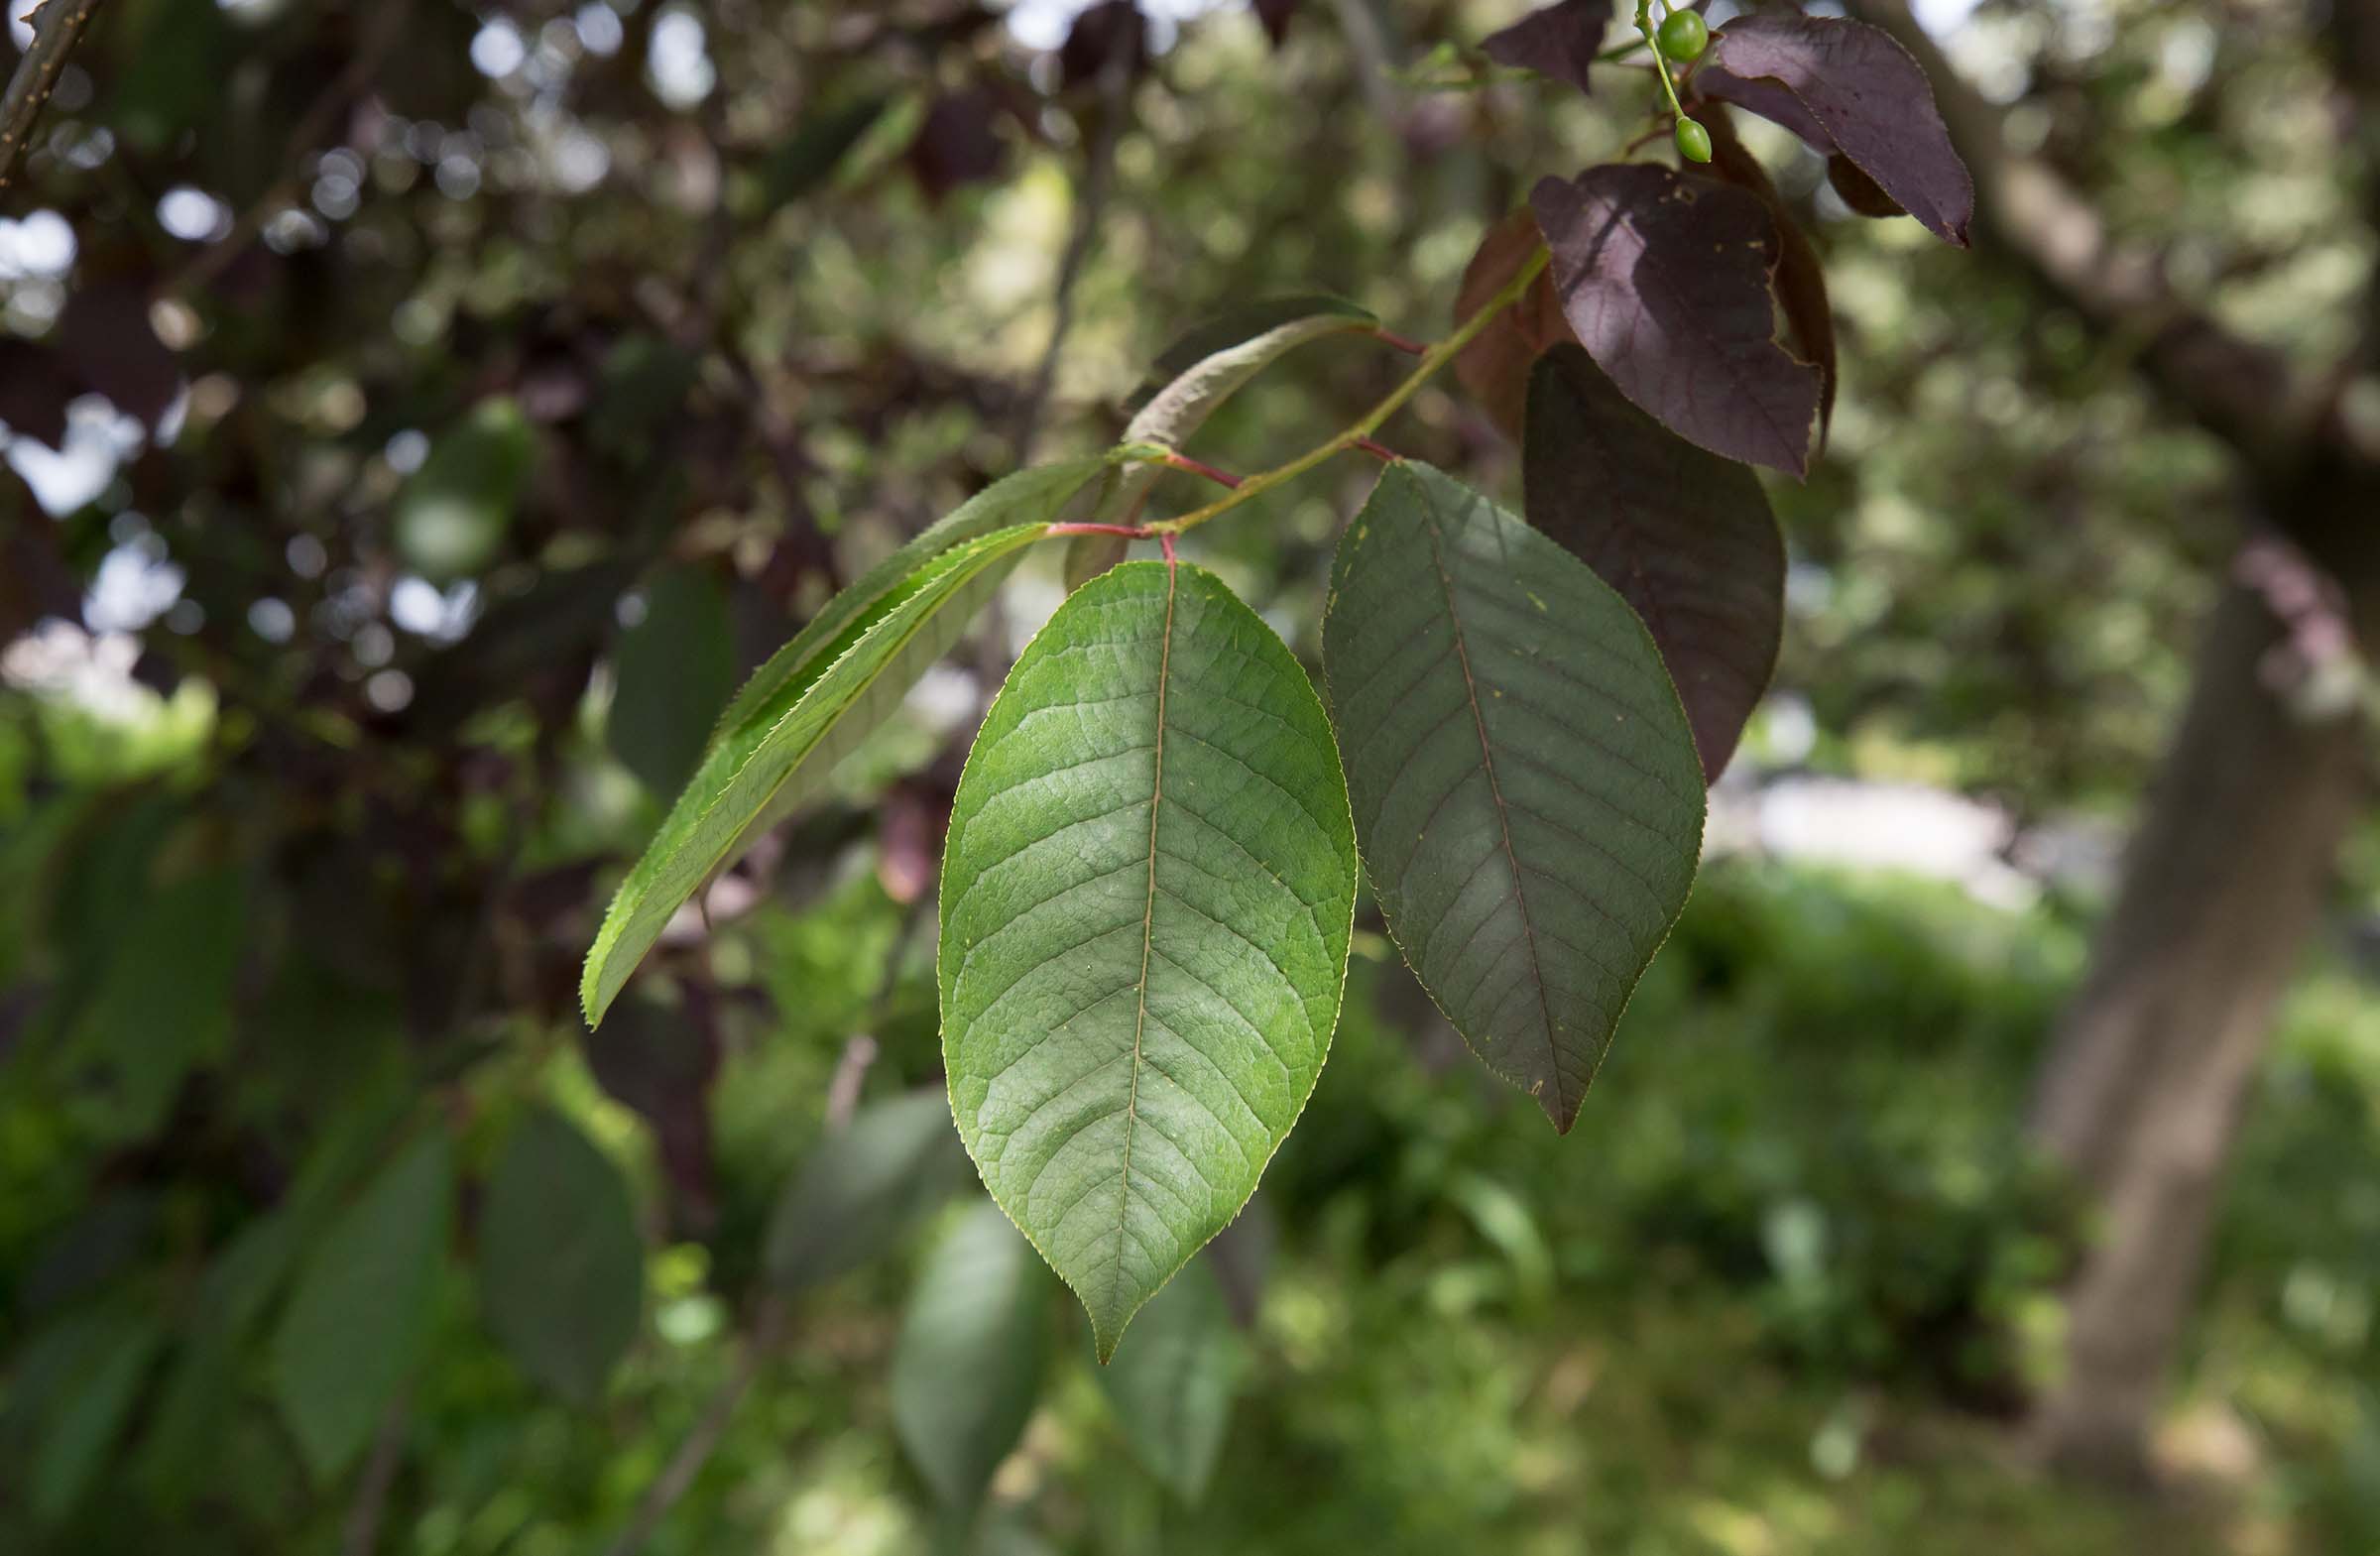 The leaves of the Canada Red Chokecherry tree are oval with a point at the top with red vein-like lines over the green